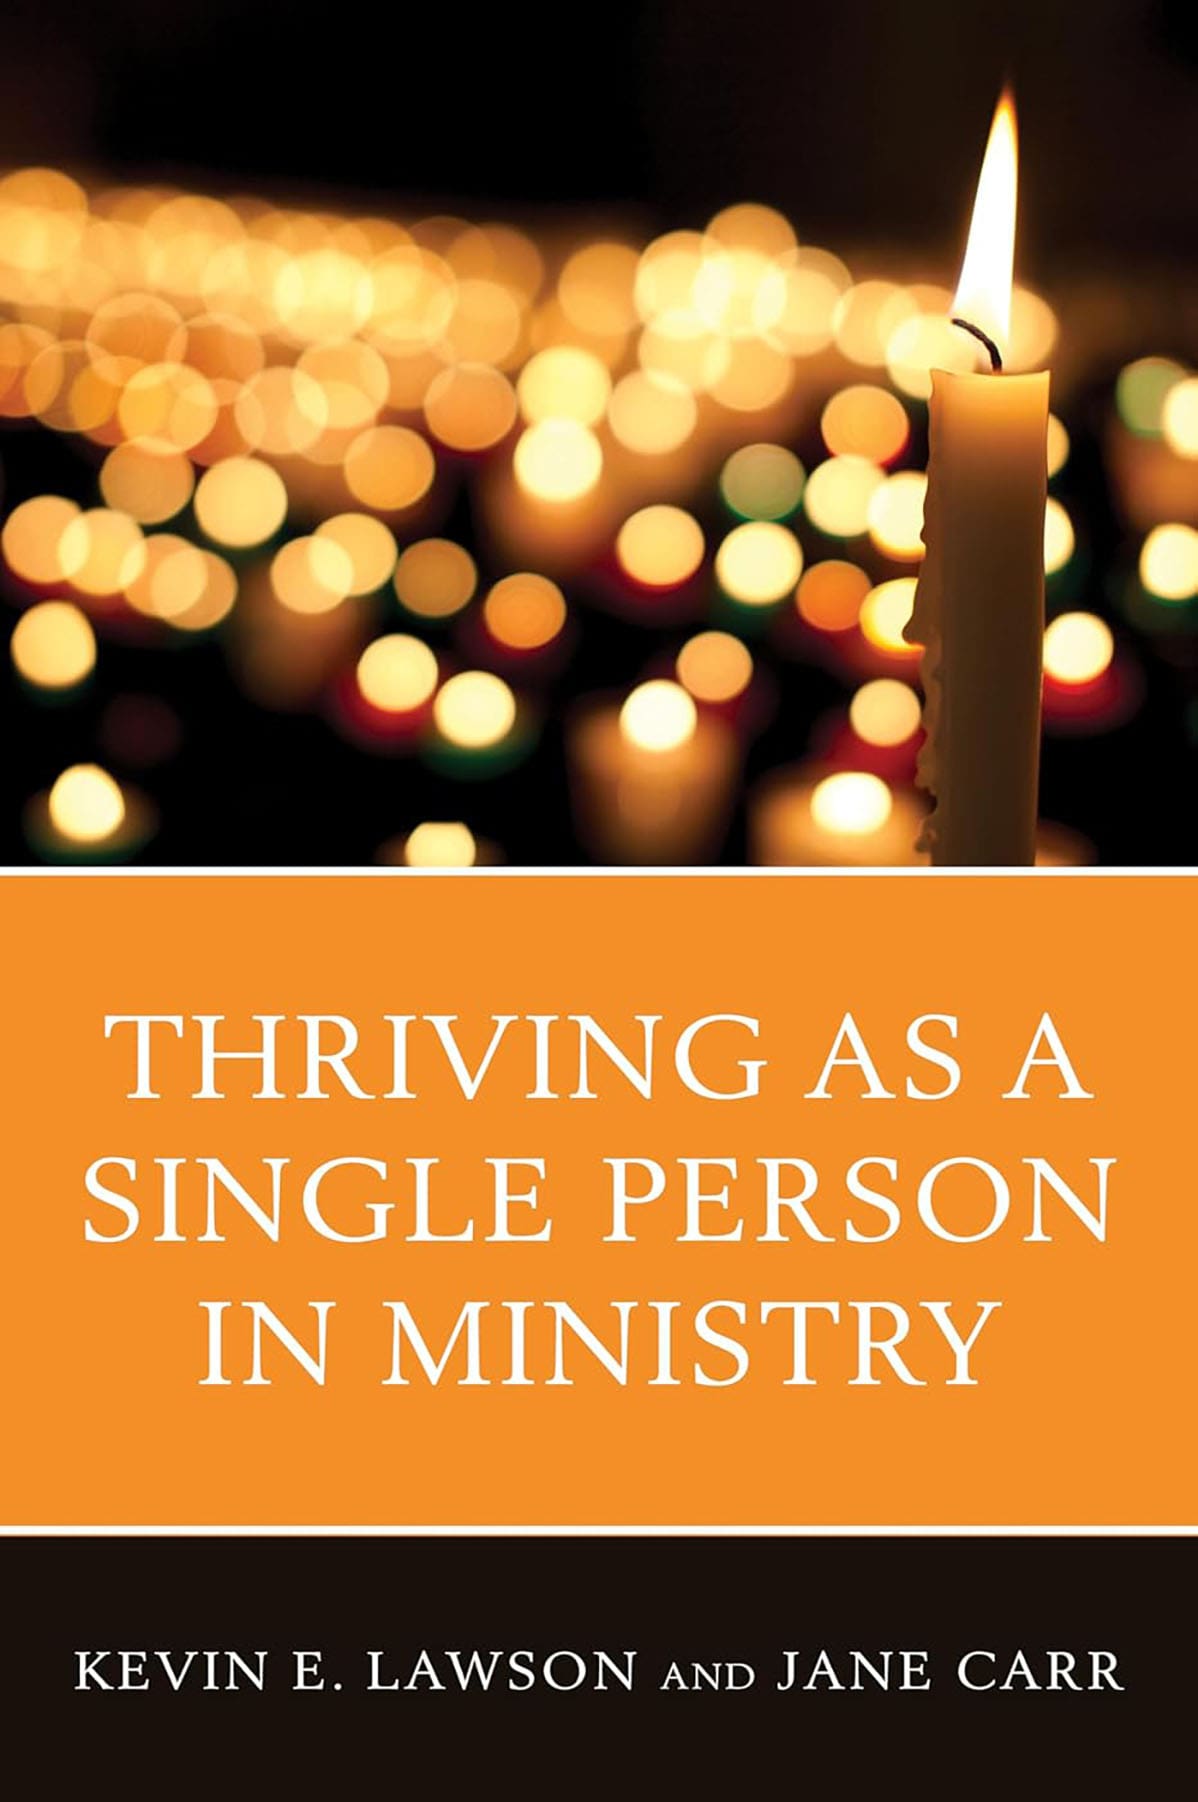 thriving-single-person-ministry